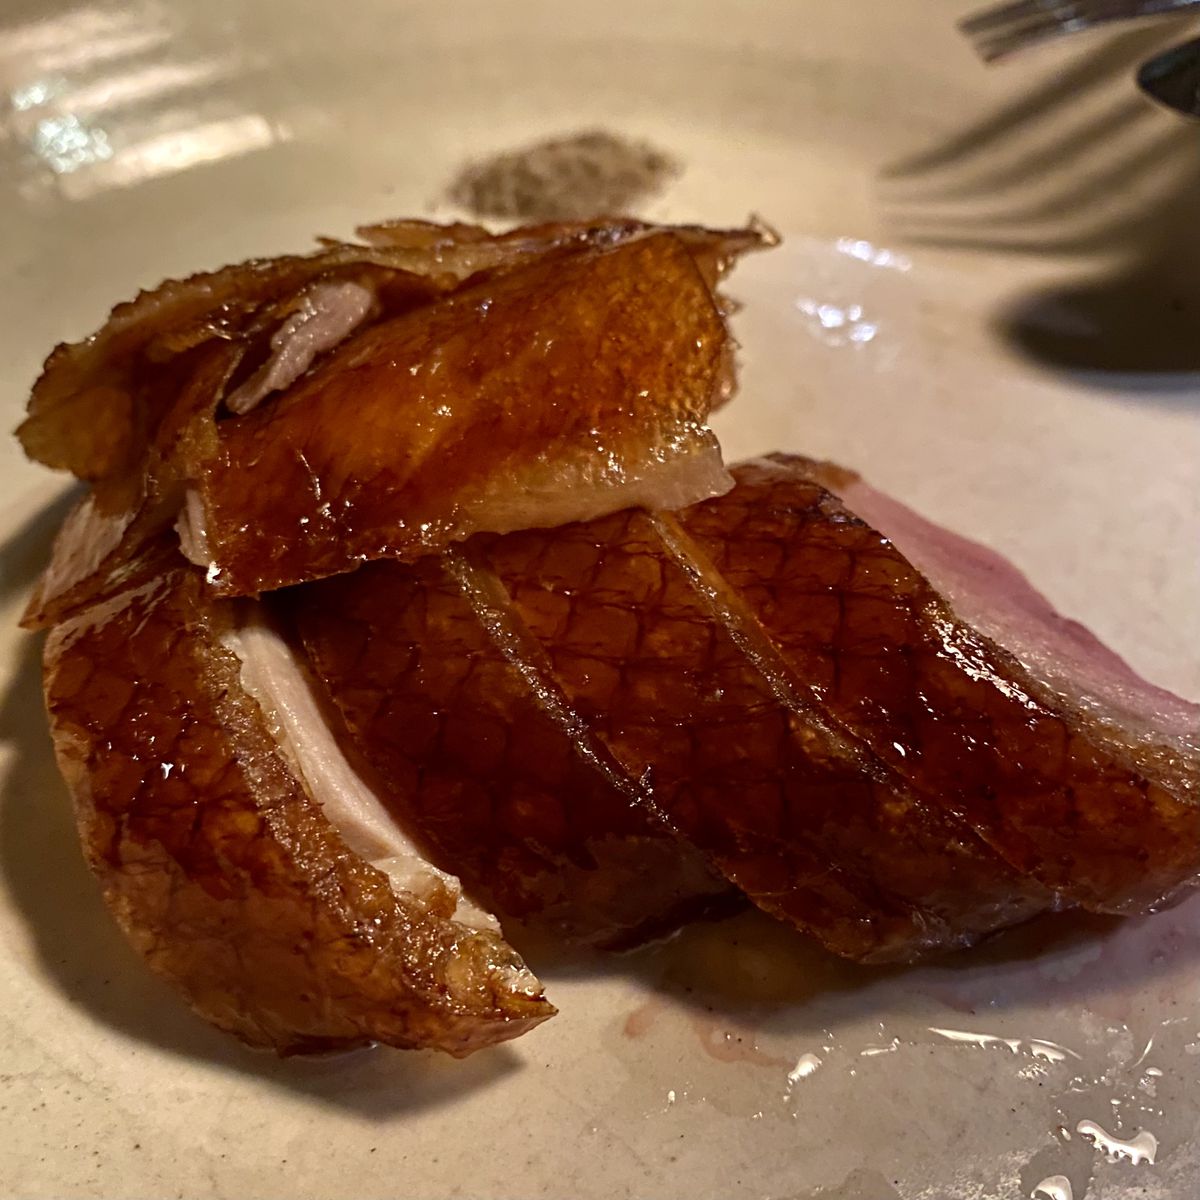 Dry-aged “Peking-style” duck from Happy Crane.